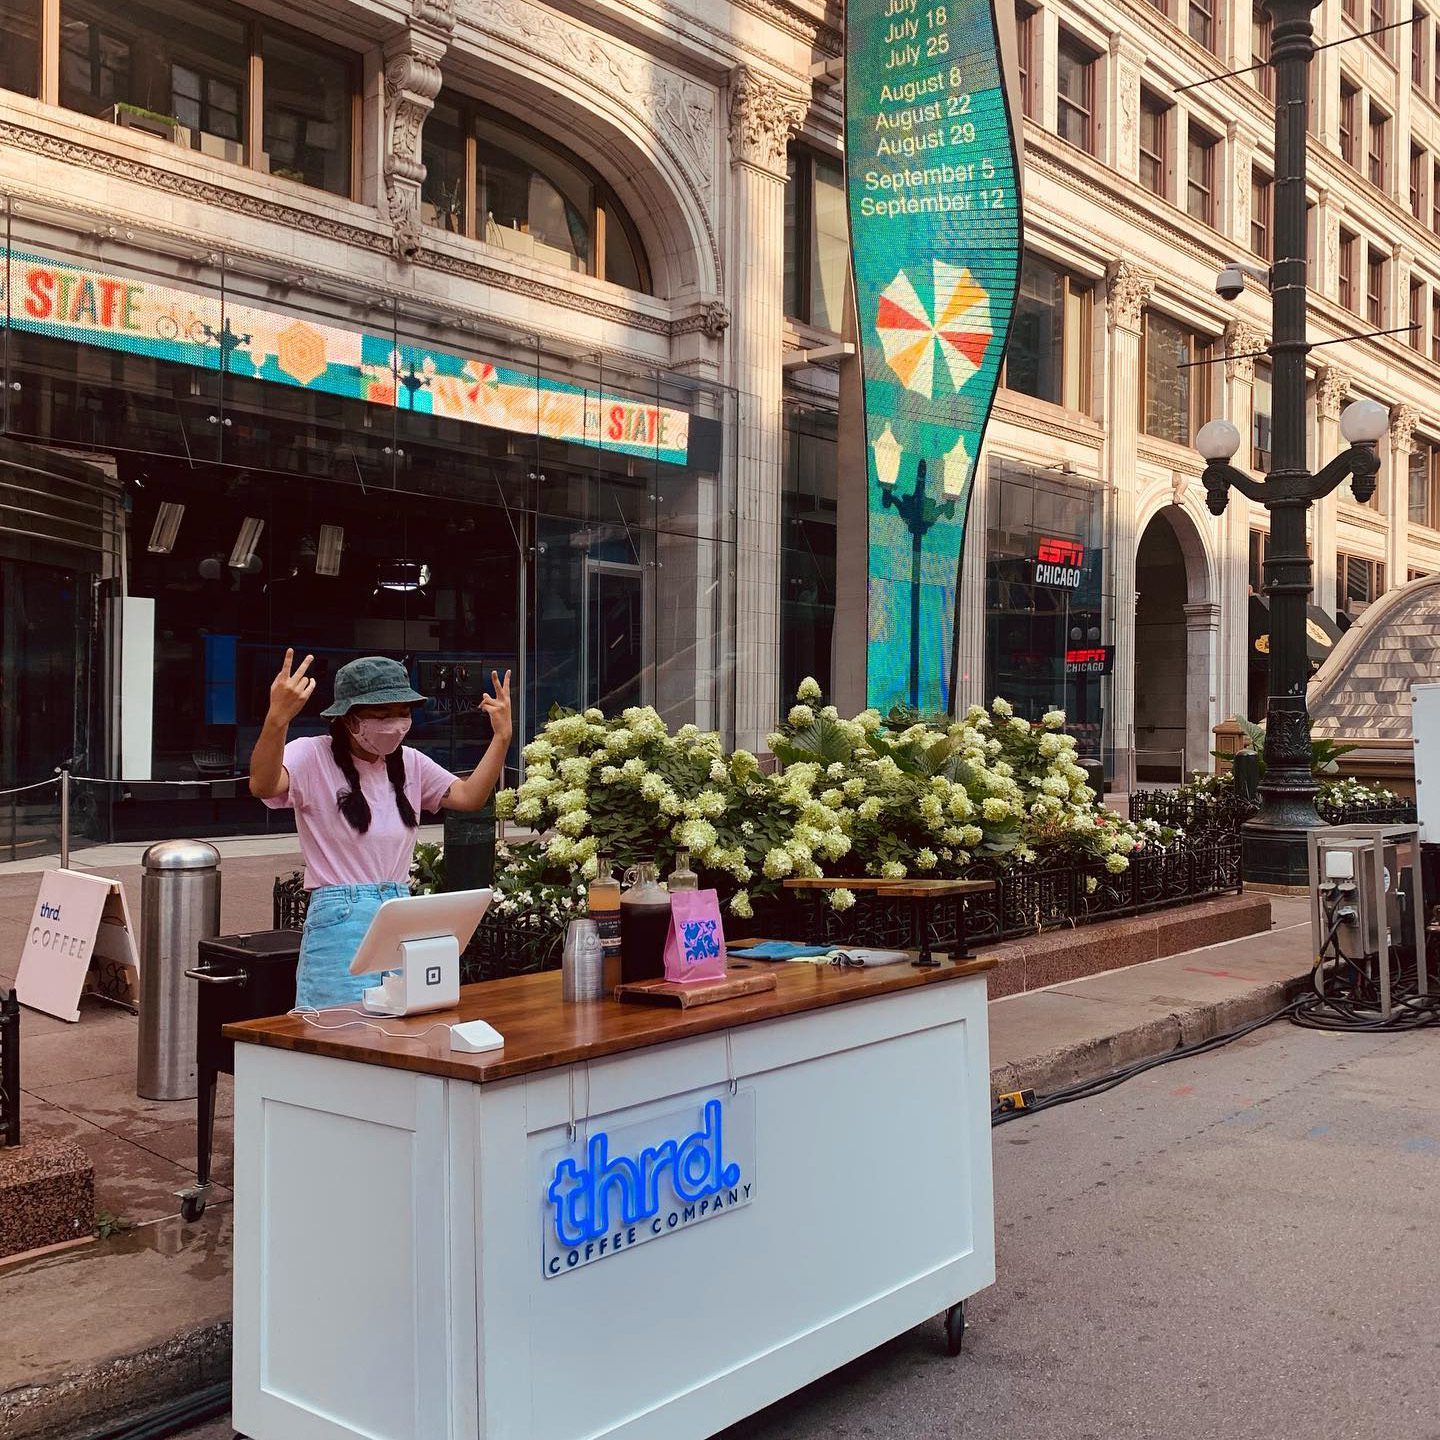 Photo shows the Thrd Coffee Company mobile coffee cart outside in downtown Chicago. The cart looks like a simple white wood counter with a brown wood top. An employee stands behind the cart, posing at the camera with peace signs.